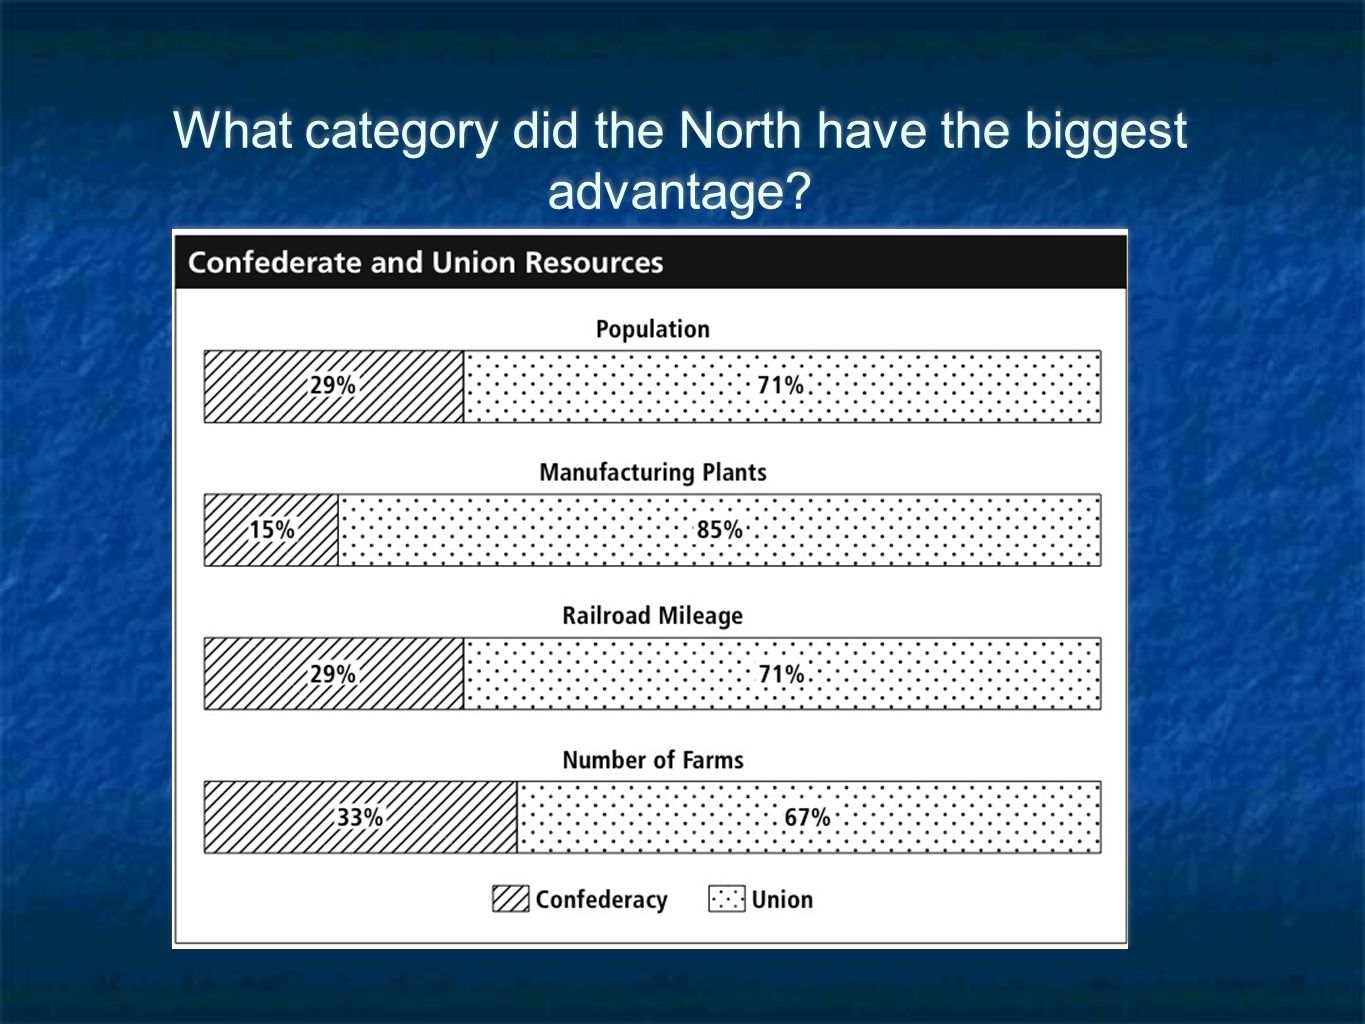 What category did the North have the biggest advantage